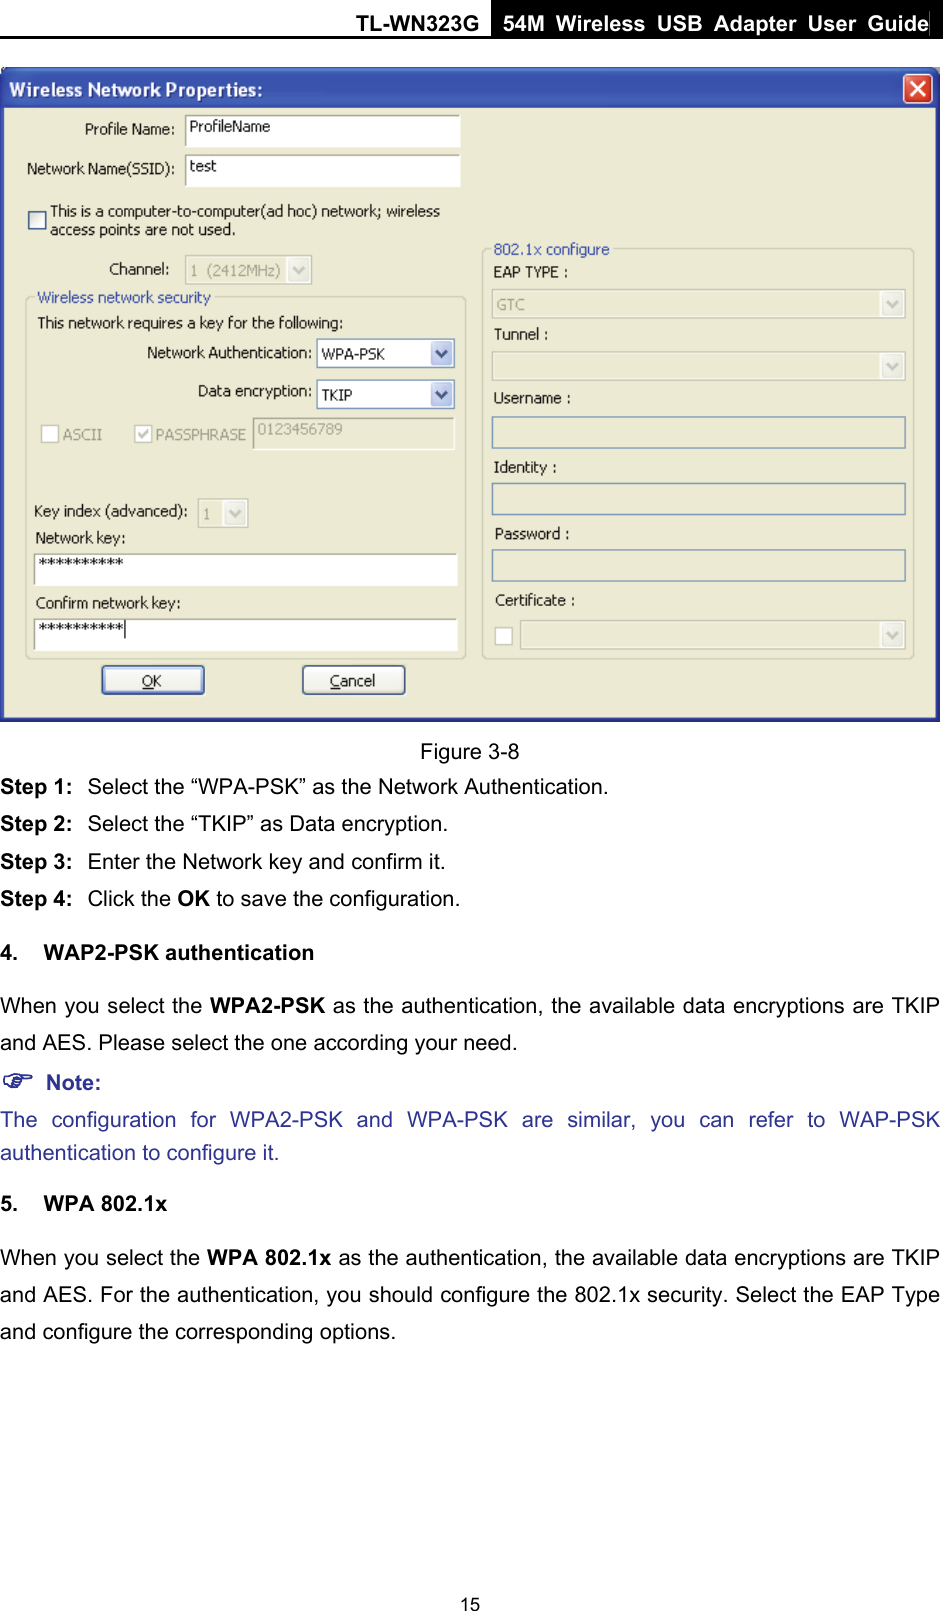 TL-WN323G 54M Wireless USB Adapter User Guide   15 Figure 3-8 Step 1:  Select the “WPA-PSK” as the Network Authentication. Step 2:  Select the “TKIP” as Data encryption. Step 3:  Enter the Network key and confirm it. Step 4:  Click the OK to save the configuration. 4. WAP2-PSK authentication When you select the WPA2-PSK as the authentication, the available data encryptions are TKIP and AES. Please select the one according your need.   ) Note: The configuration for WPA2-PSK and WPA-PSK are similar, you can refer to WAP-PSK authentication to configure it. 5. WPA 802.1x When you select the WPA 802.1x as the authentication, the available data encryptions are TKIP and AES. For the authentication, you should configure the 802.1x security. Select the EAP Type and configure the corresponding options. 